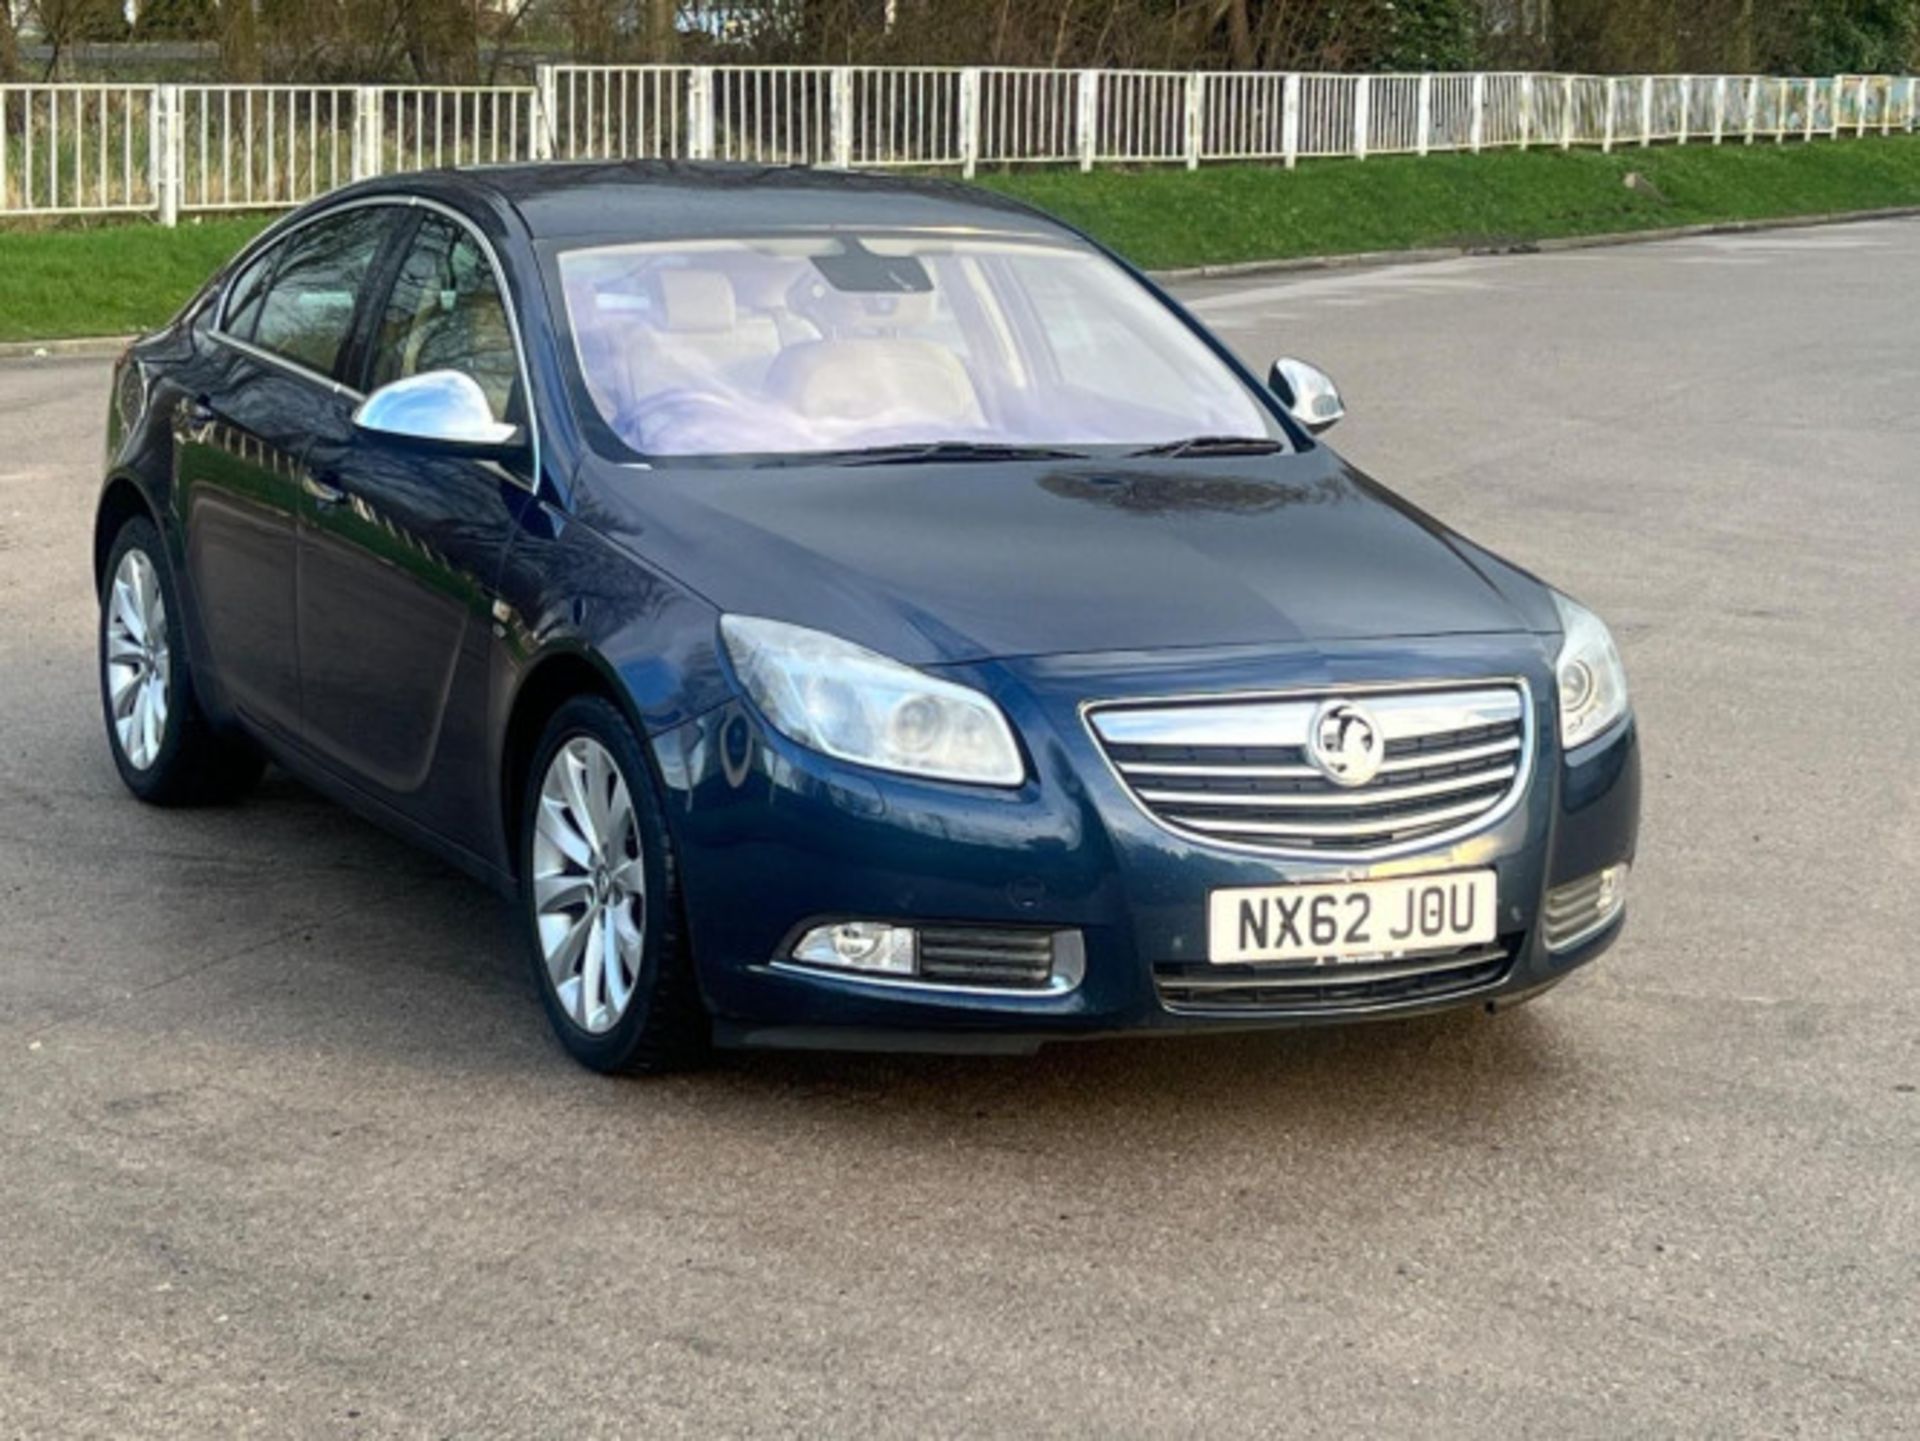 2012 VAUXHALL INSIGNIA 2.0 CDTI ELITE AUTO EURO 5 - DISCOVER EXCELLENCE >>--NO VAT ON HAMMER--<< - Image 109 of 120